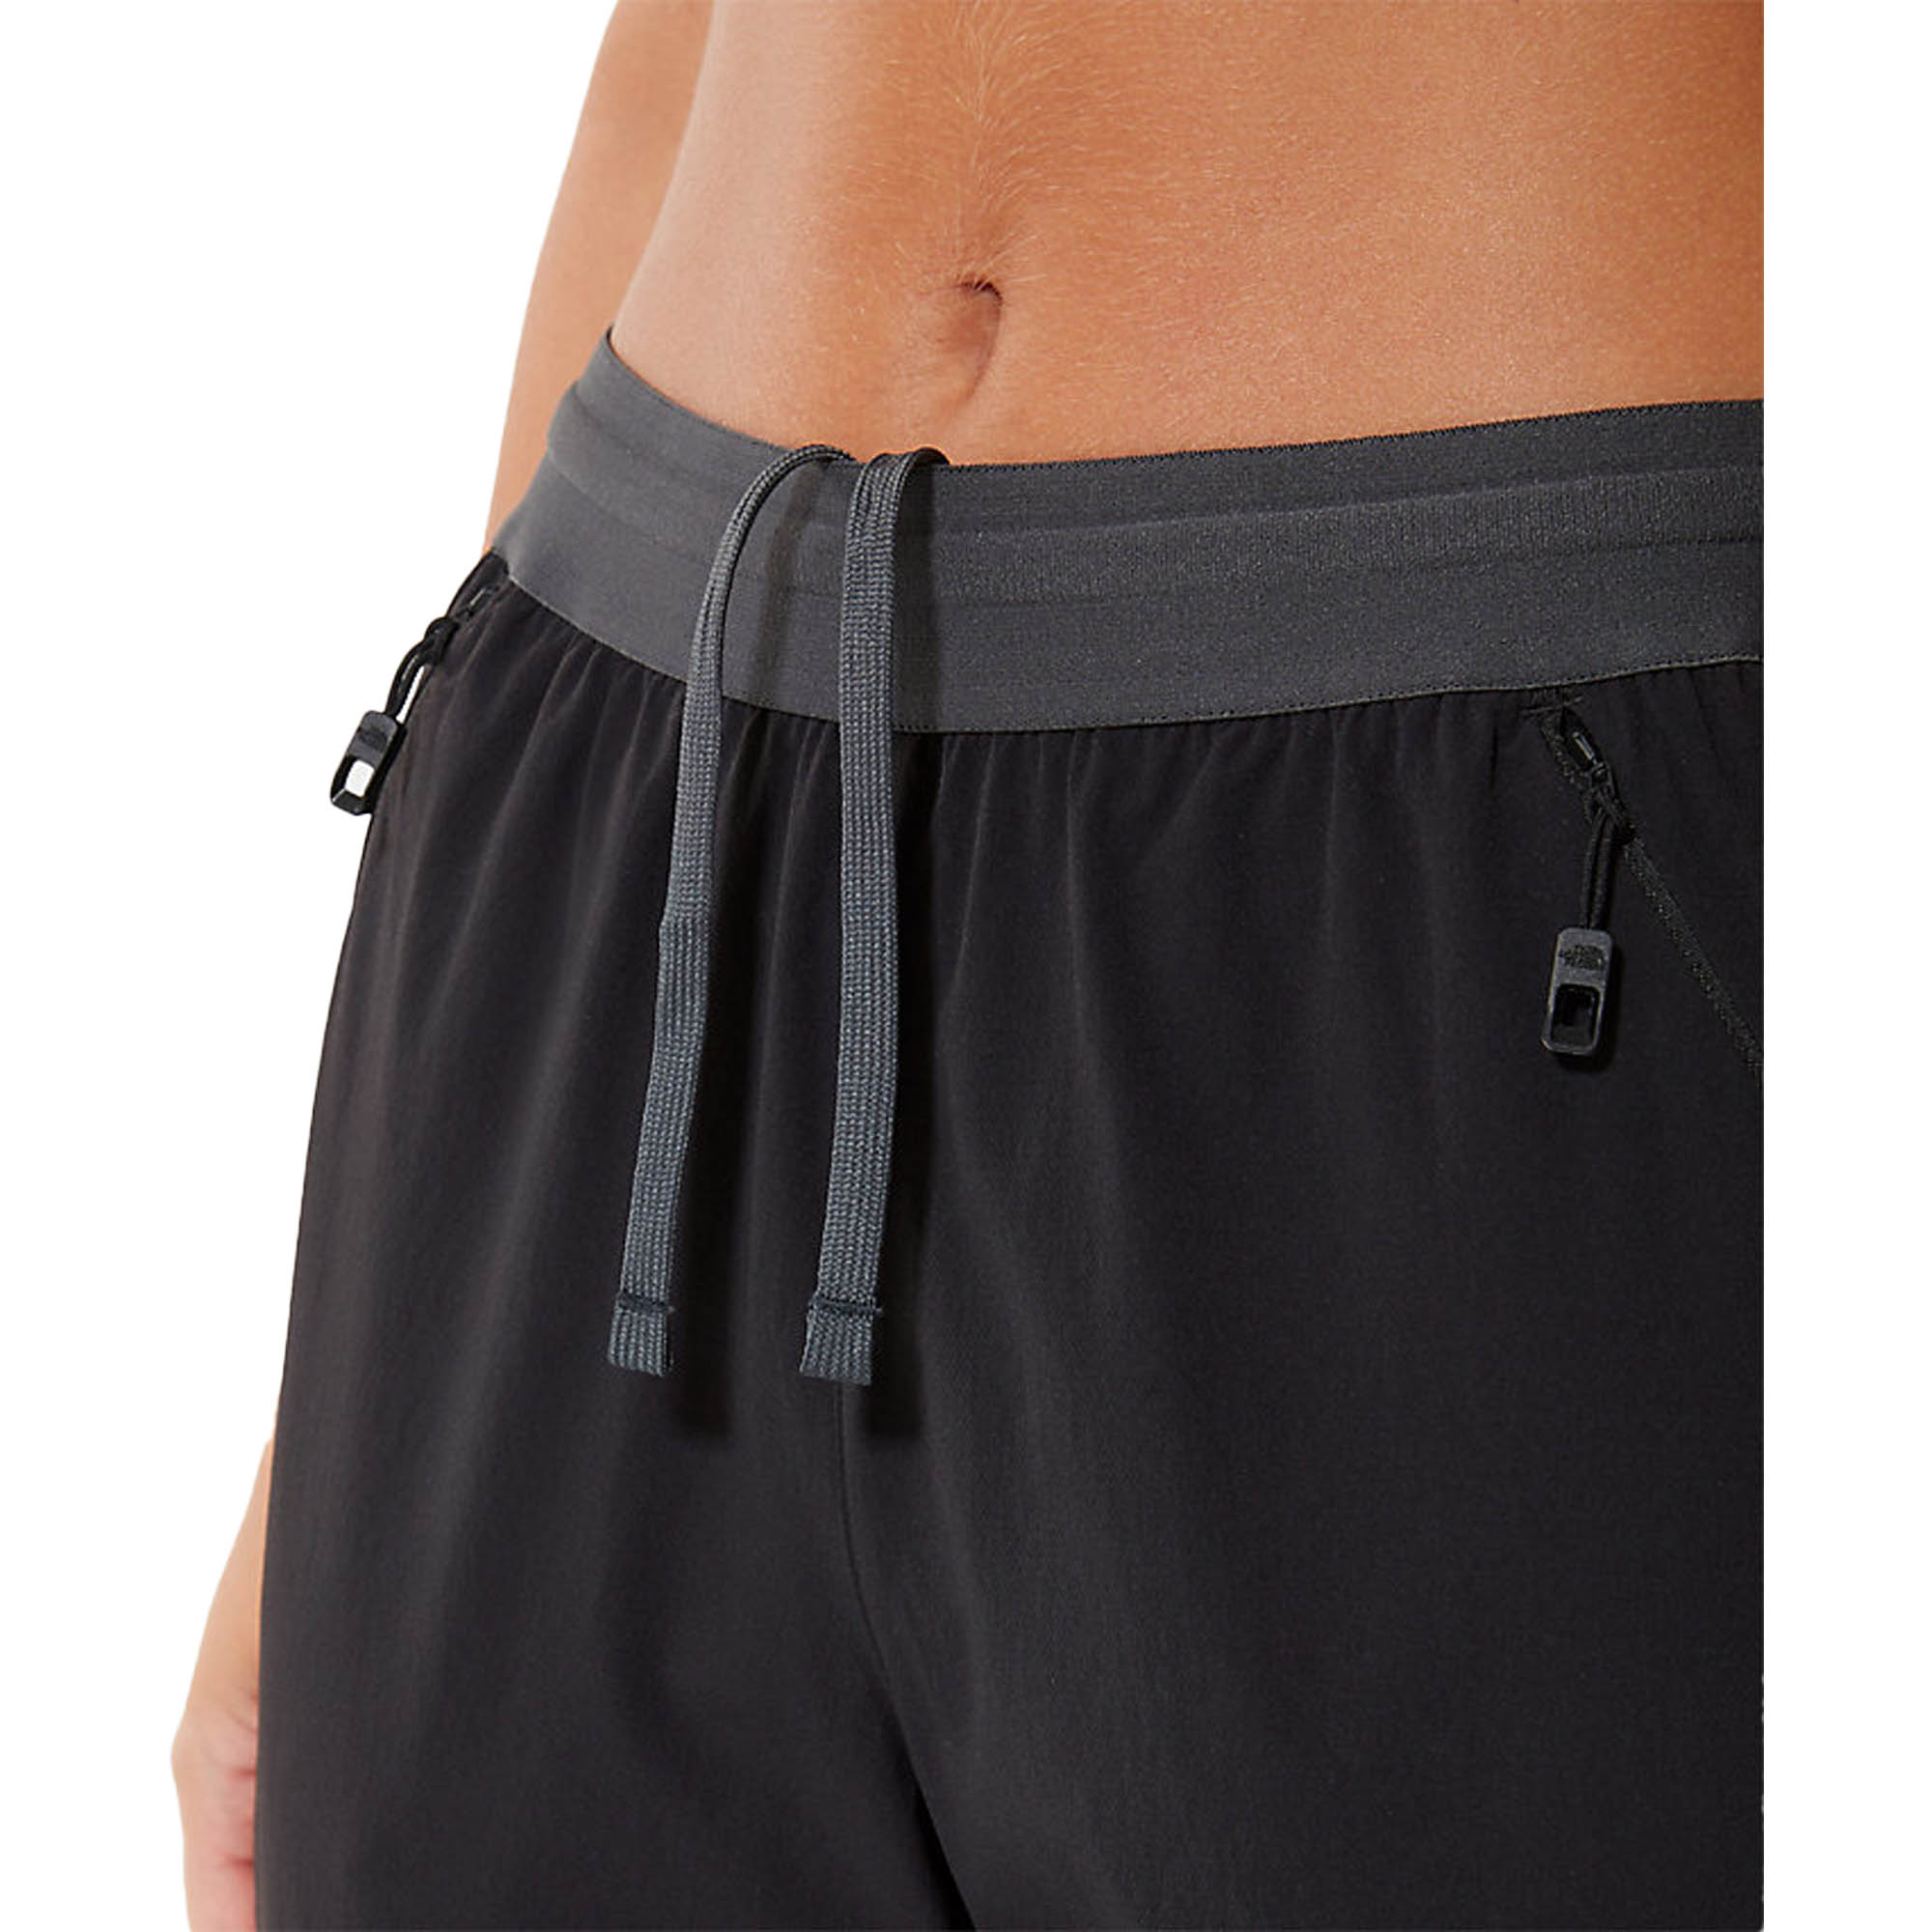 The North Face AO Woven Women's Active Pants